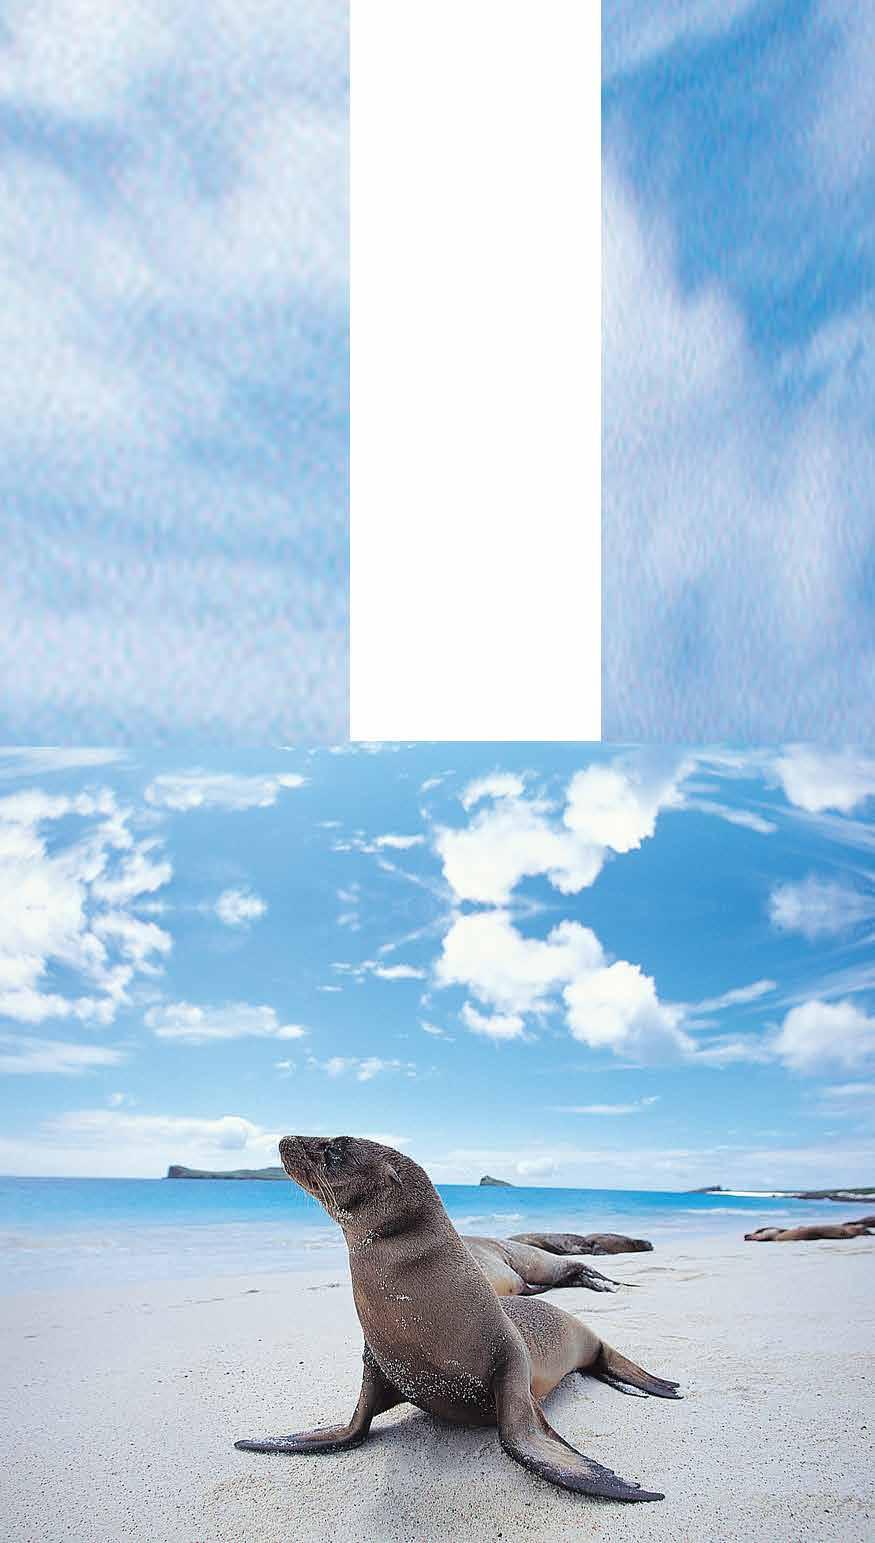 Dear Alumni and Friends, Join fellow alumni and friends as we explore the Galapagos Islands.